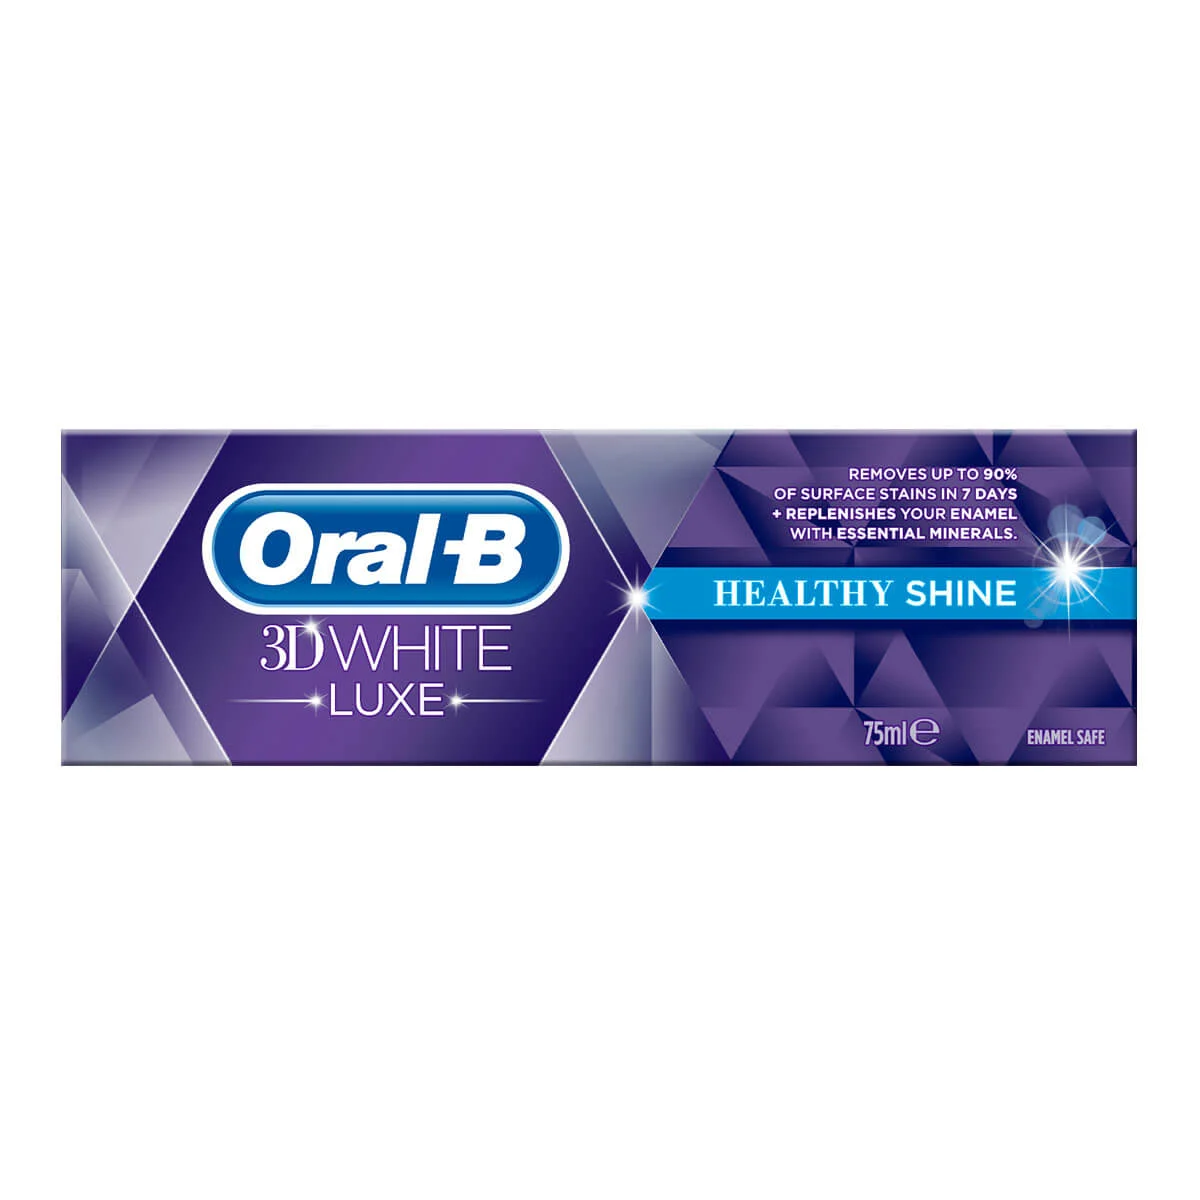 Oral-B 3D White Luxe Healthy Shine tandkräm 